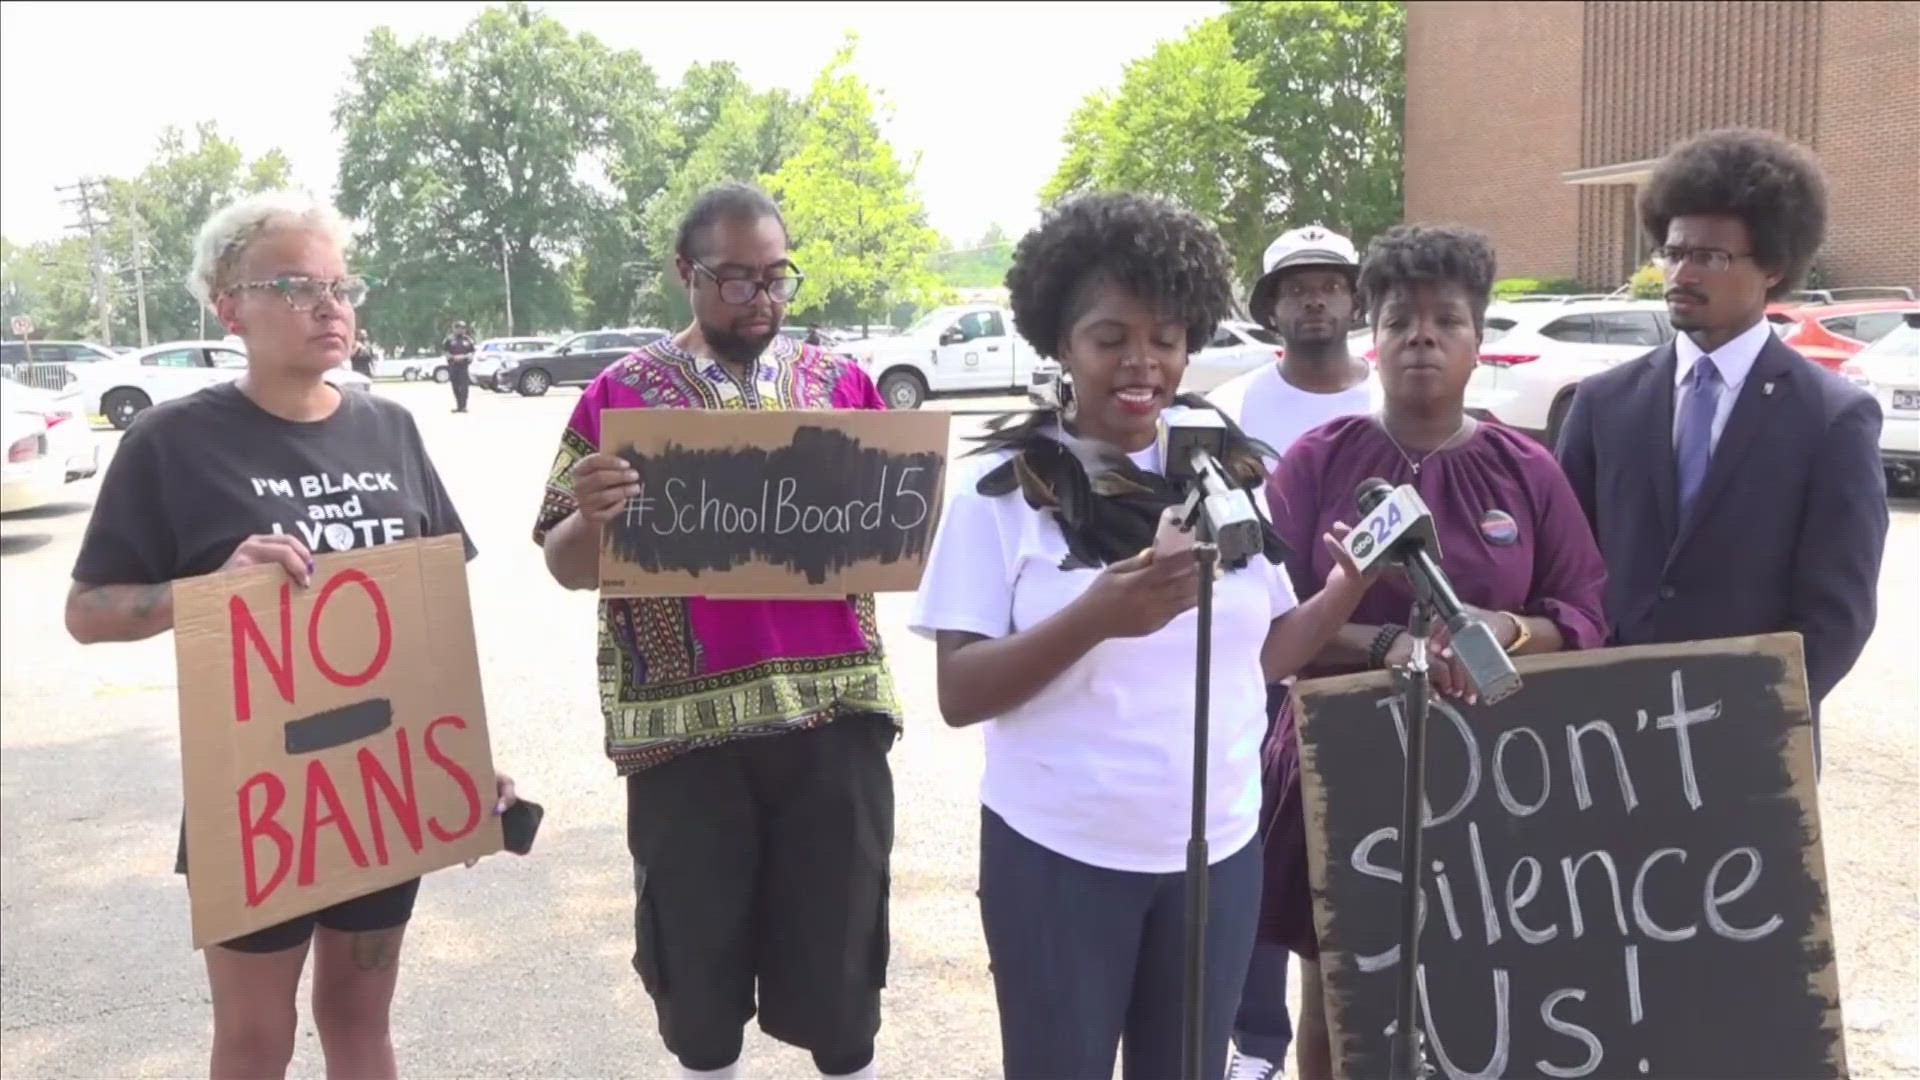 Parents and activists took to protesting outside Memphis-Shelby County Schools headquarters as board members met inside for a third retreat.